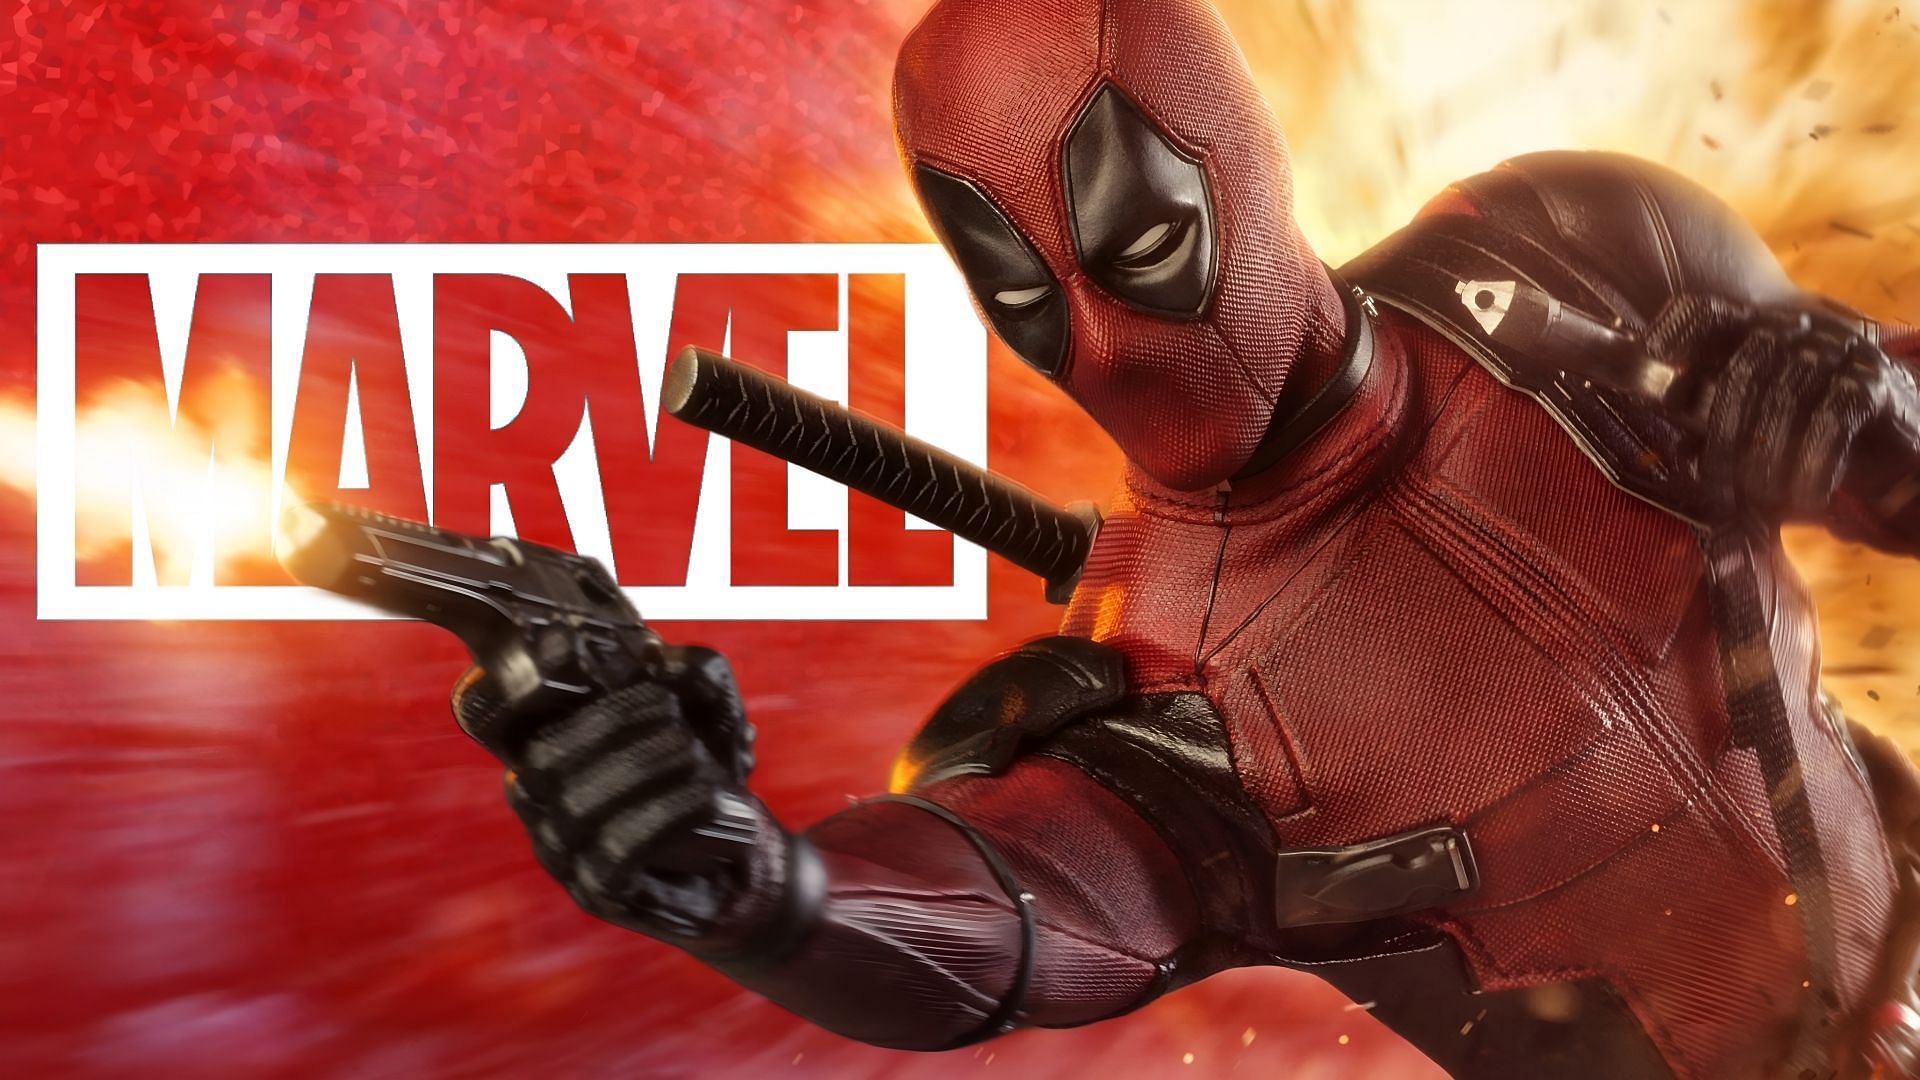 The Deadpool franchise has now become an integral part of the MCU. (Image via Marvel)